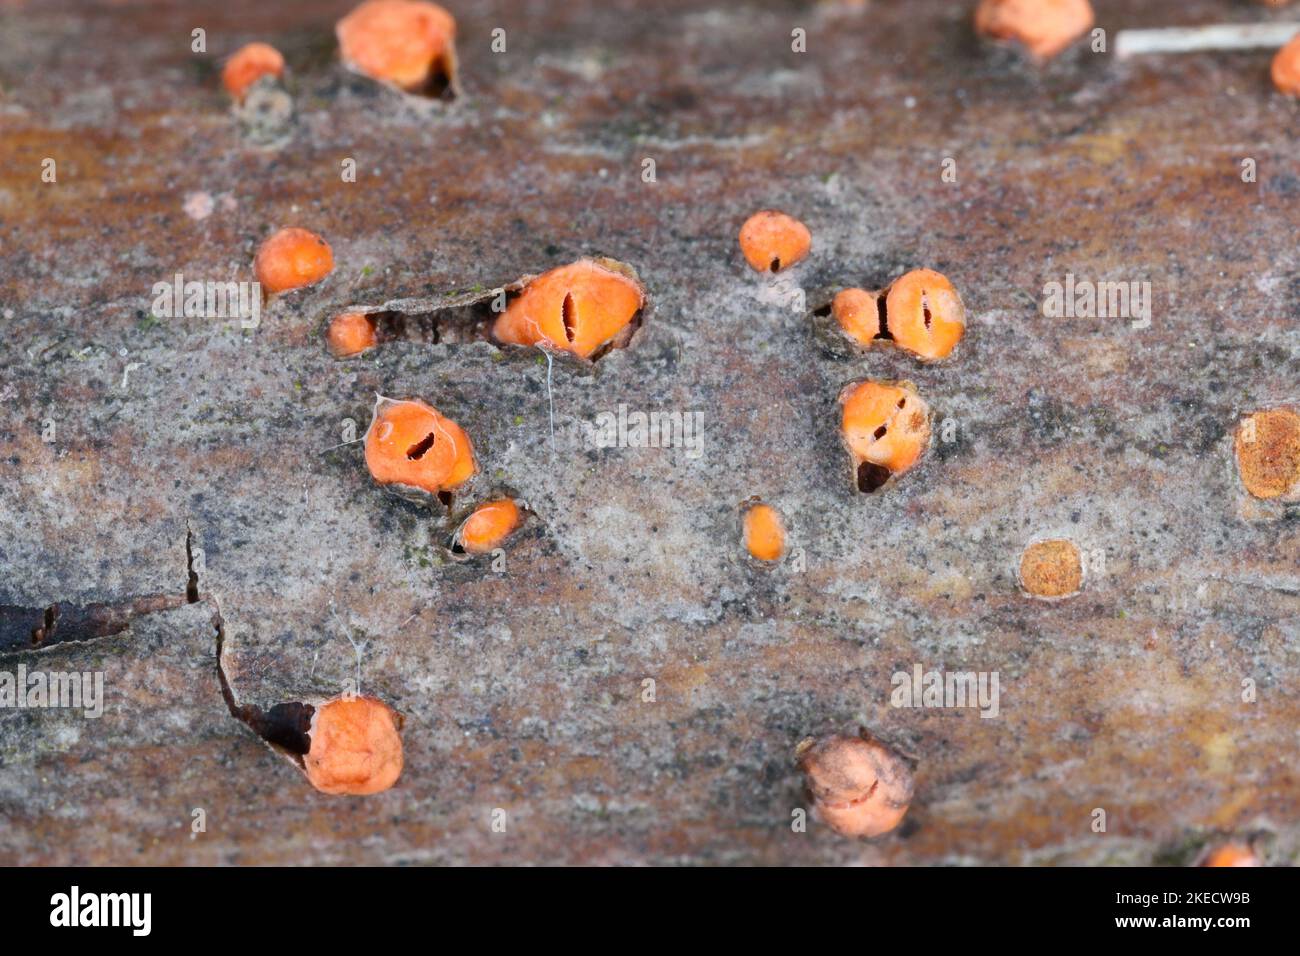 Nectria cinnabarina, also known as coral spot, is a plant pathogen that causes cankers on broadleaf trees. Stock Photo